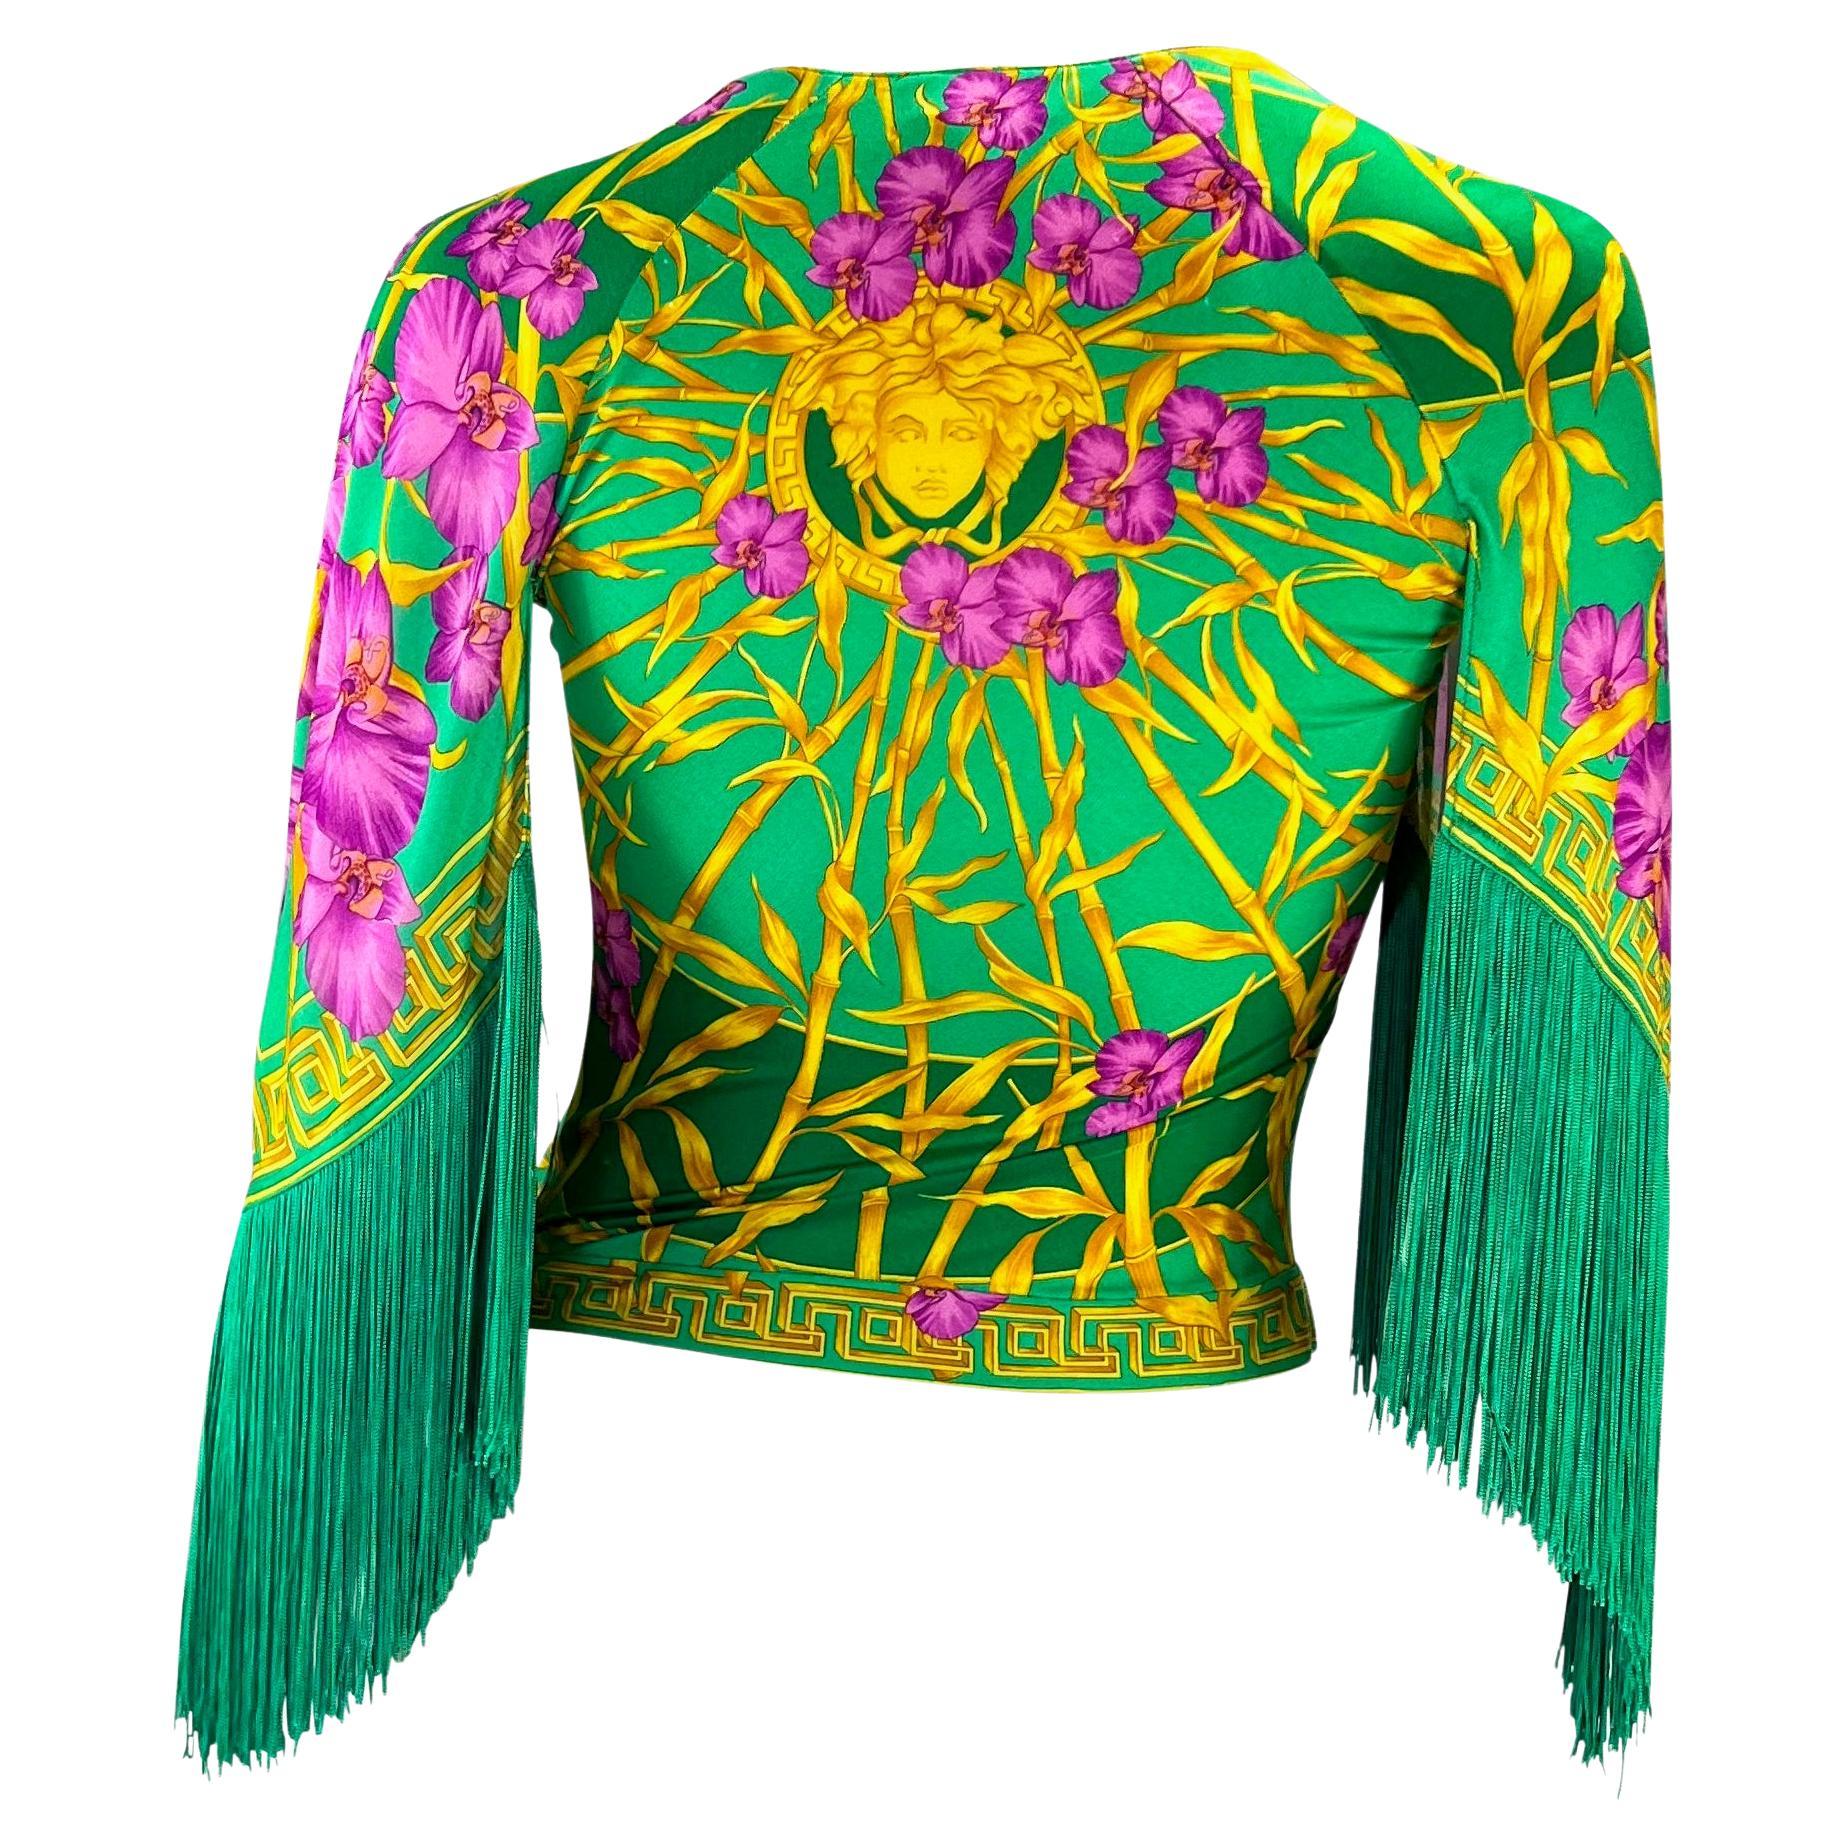 S/S 2000 Gianni Versace by Donatella Fringe Medusa Bamboo Orchid Jungle Top In Excellent Condition For Sale In West Hollywood, CA